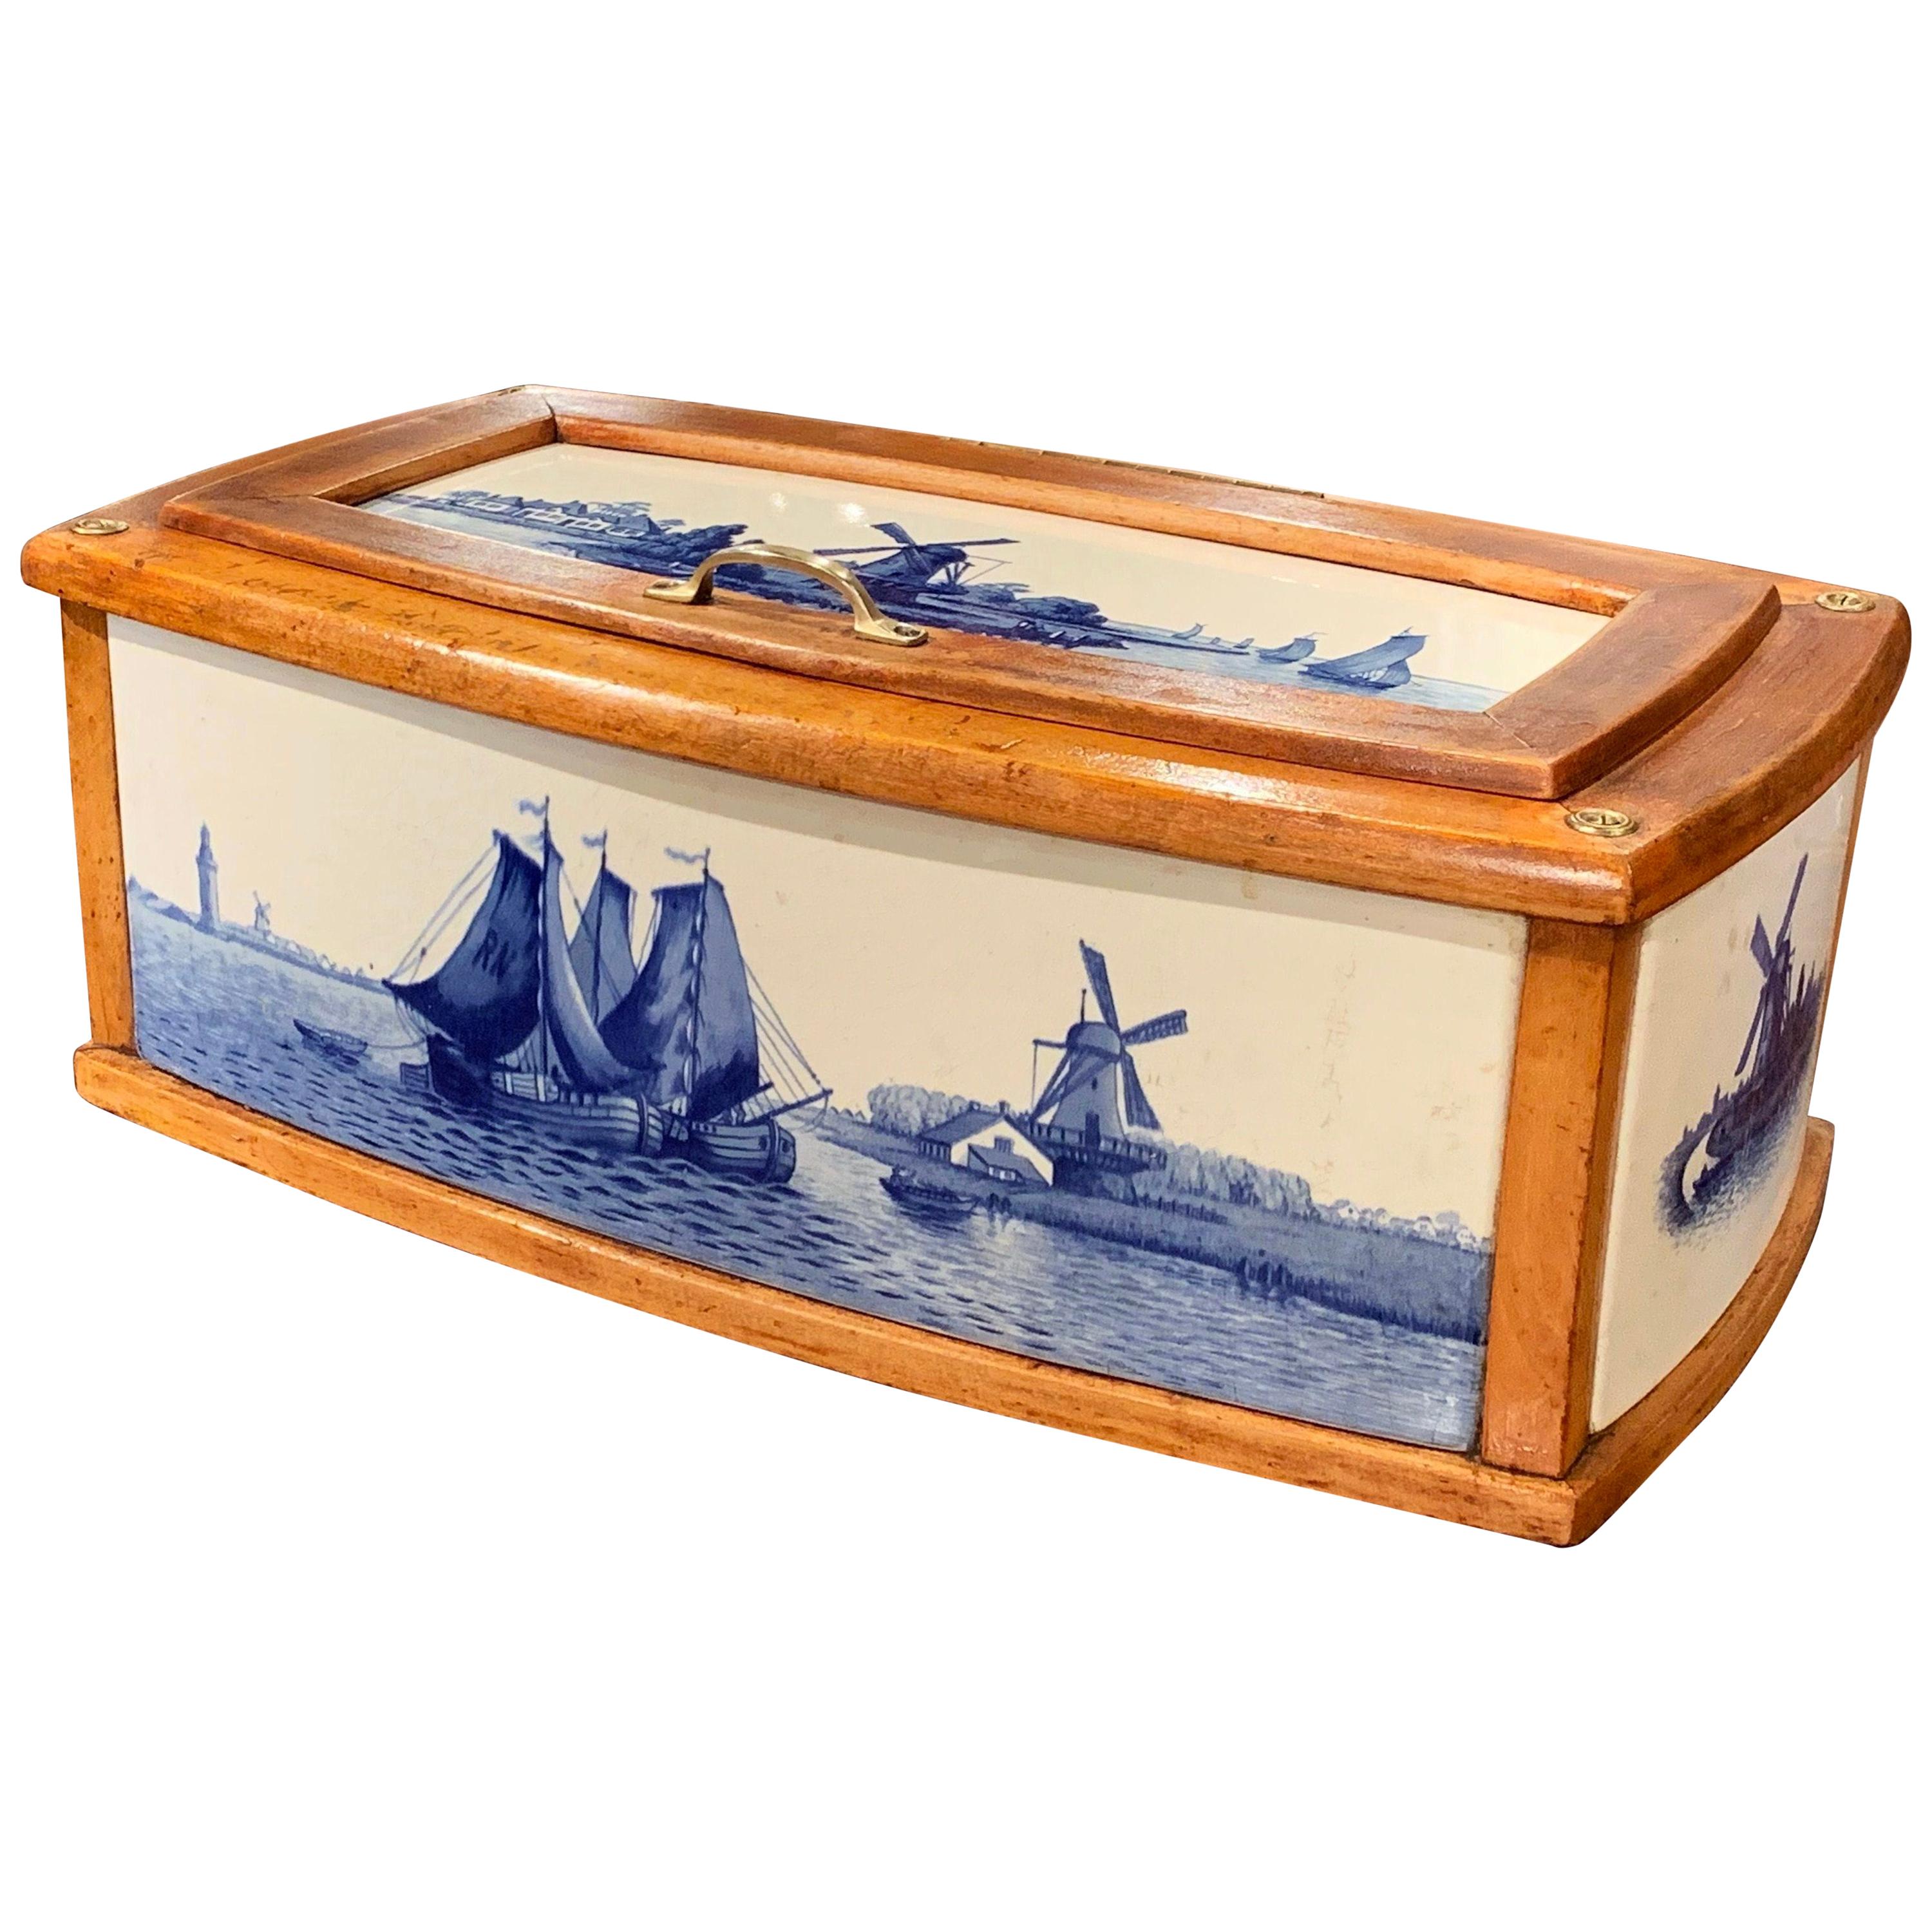 19th Century French Maple and Porcelain Tile Bread Box from Villeroy and Boch